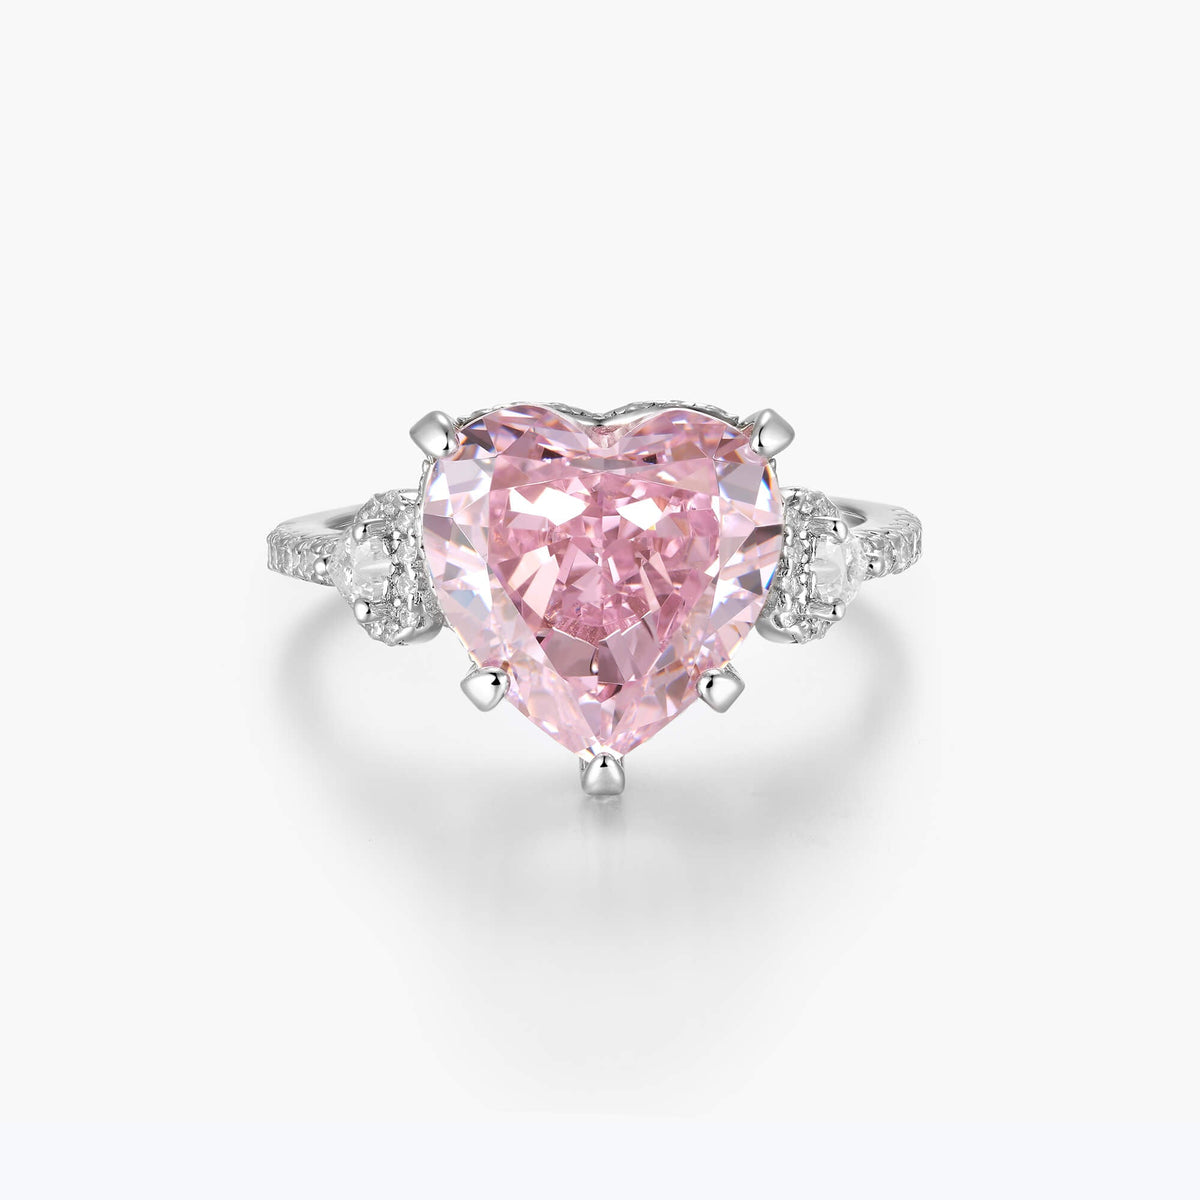 Lafonn Double-Halo Engagement Ring PINK RINGS Size 5 Platinum 2.48 CTS  Approx.15.5(H)*11.3(W) – Wolf Fine Jewelers